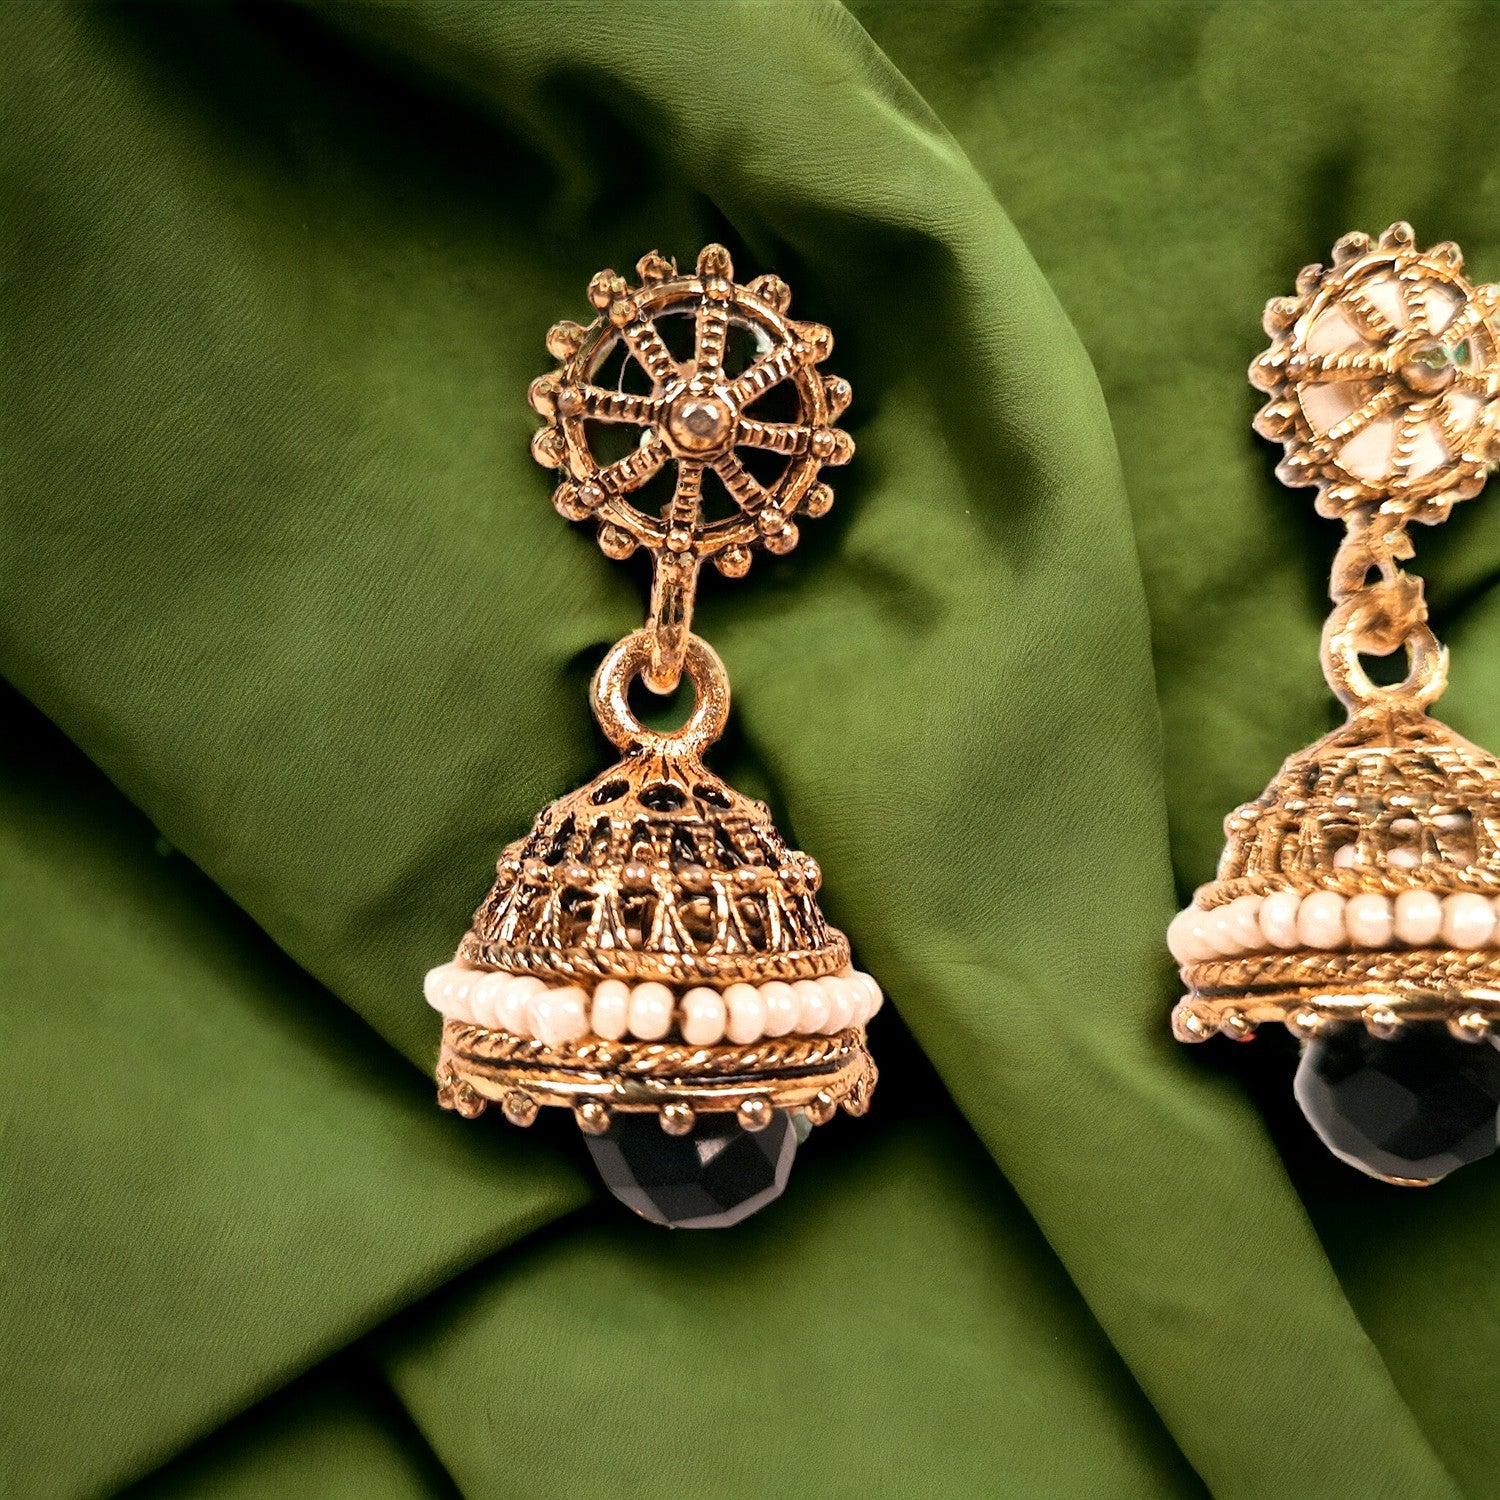 Earrings Jhumka - for Girls and Women | Latest Stylish Fashion Jewellery | Gifts for Her, Friendship Day, Valentine's Day Gift - apkamart